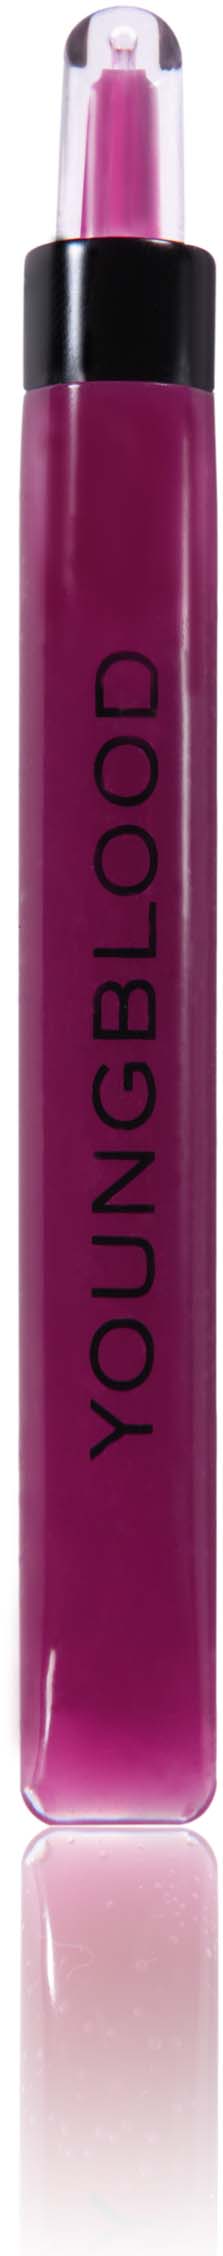 Youngblood Mighty Shiny Lip Gel 05 Exposed